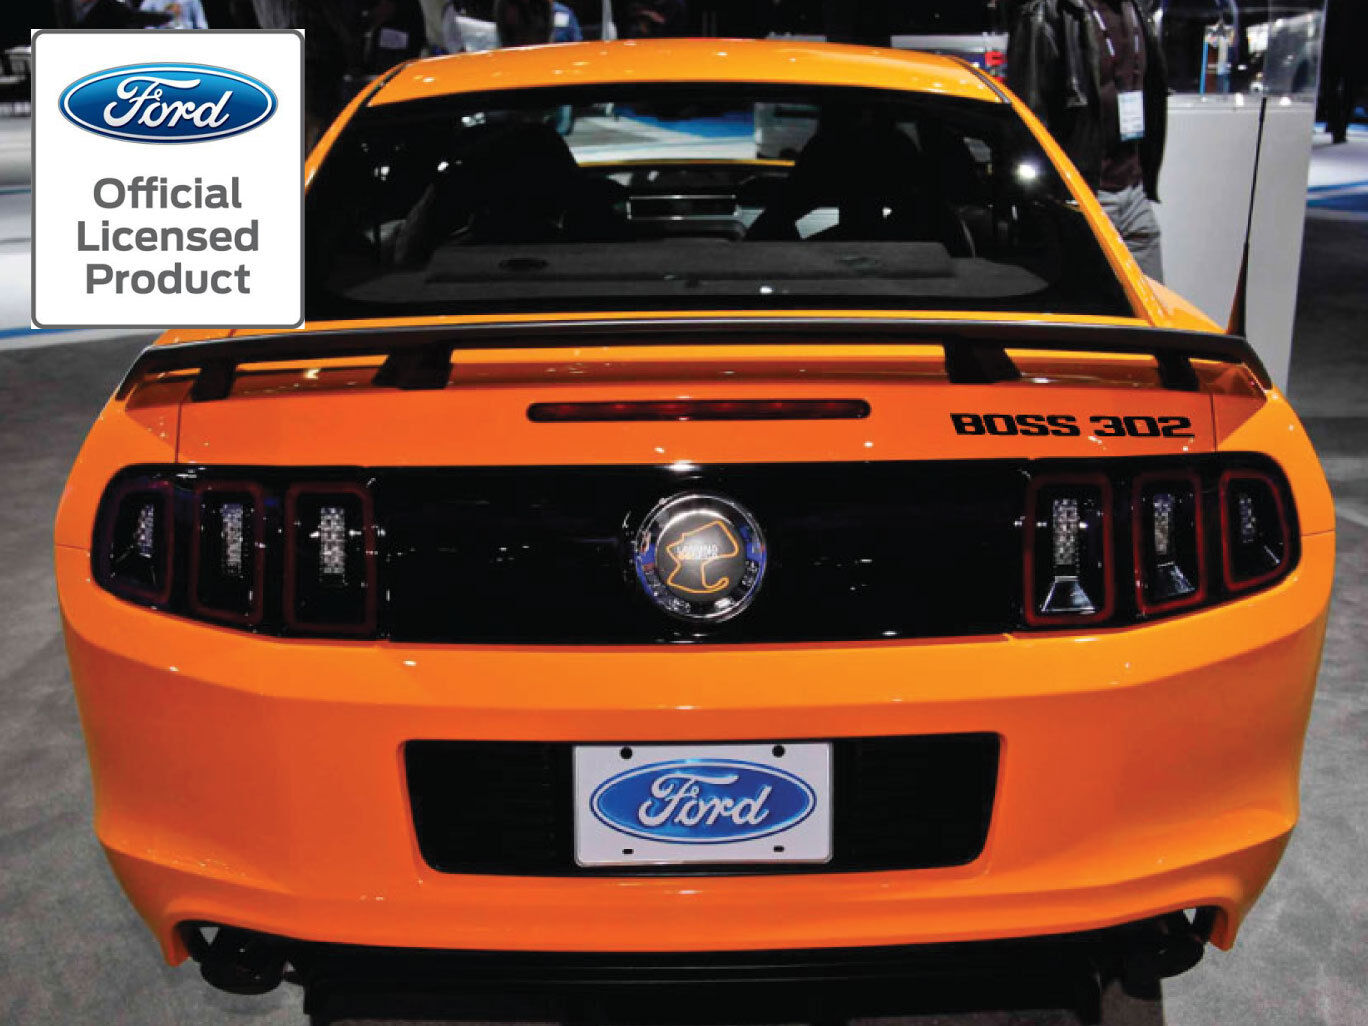 Ford Mustang Rear Boss 302 Decal Vinyl Graphics Ford Licensed 2010-2014 Stickers